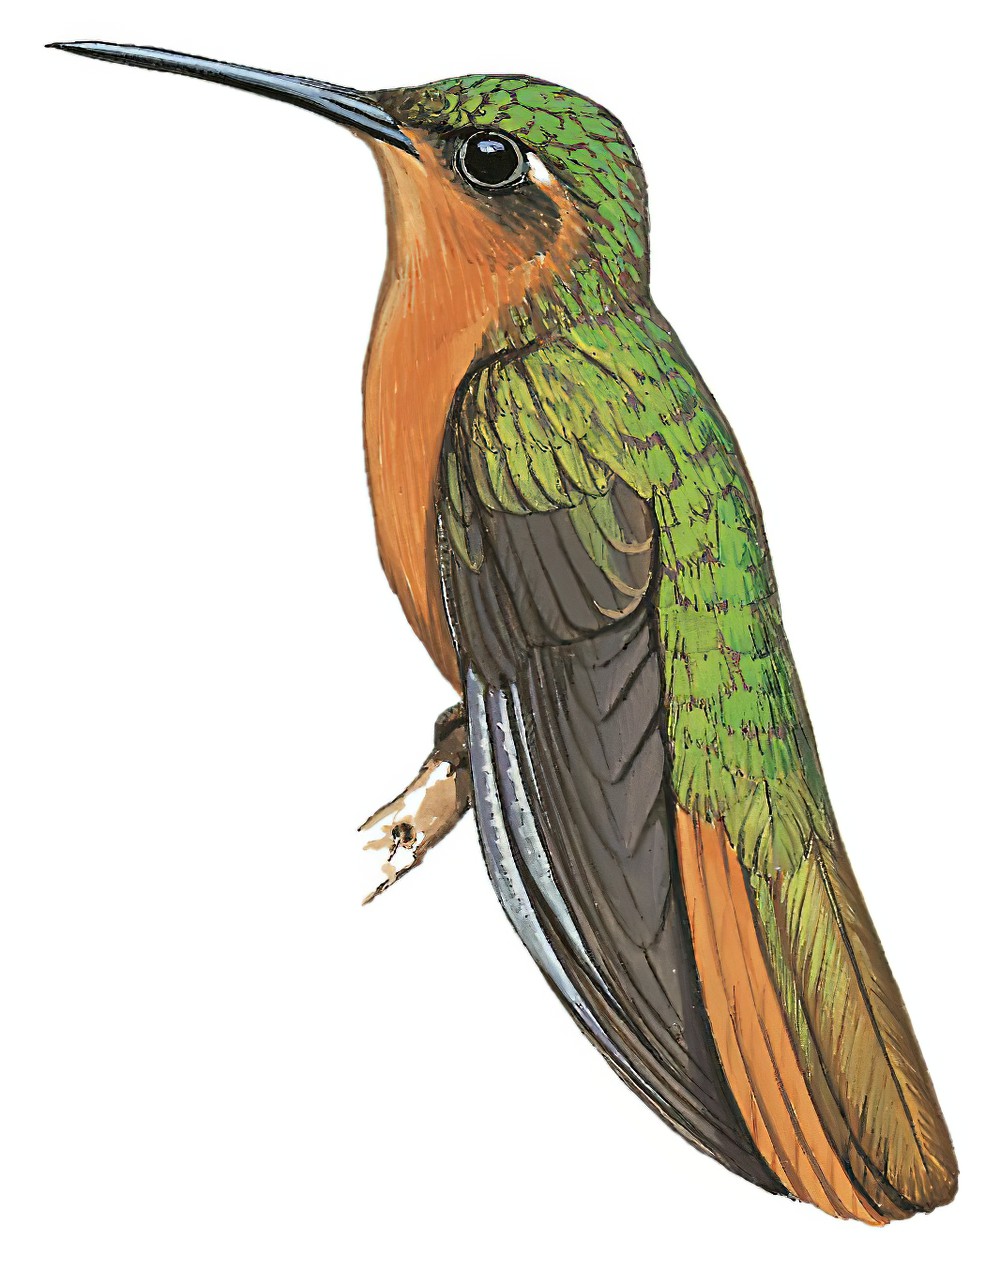 Rufous-breasted Sabrewing / Campylopterus hyperythrus